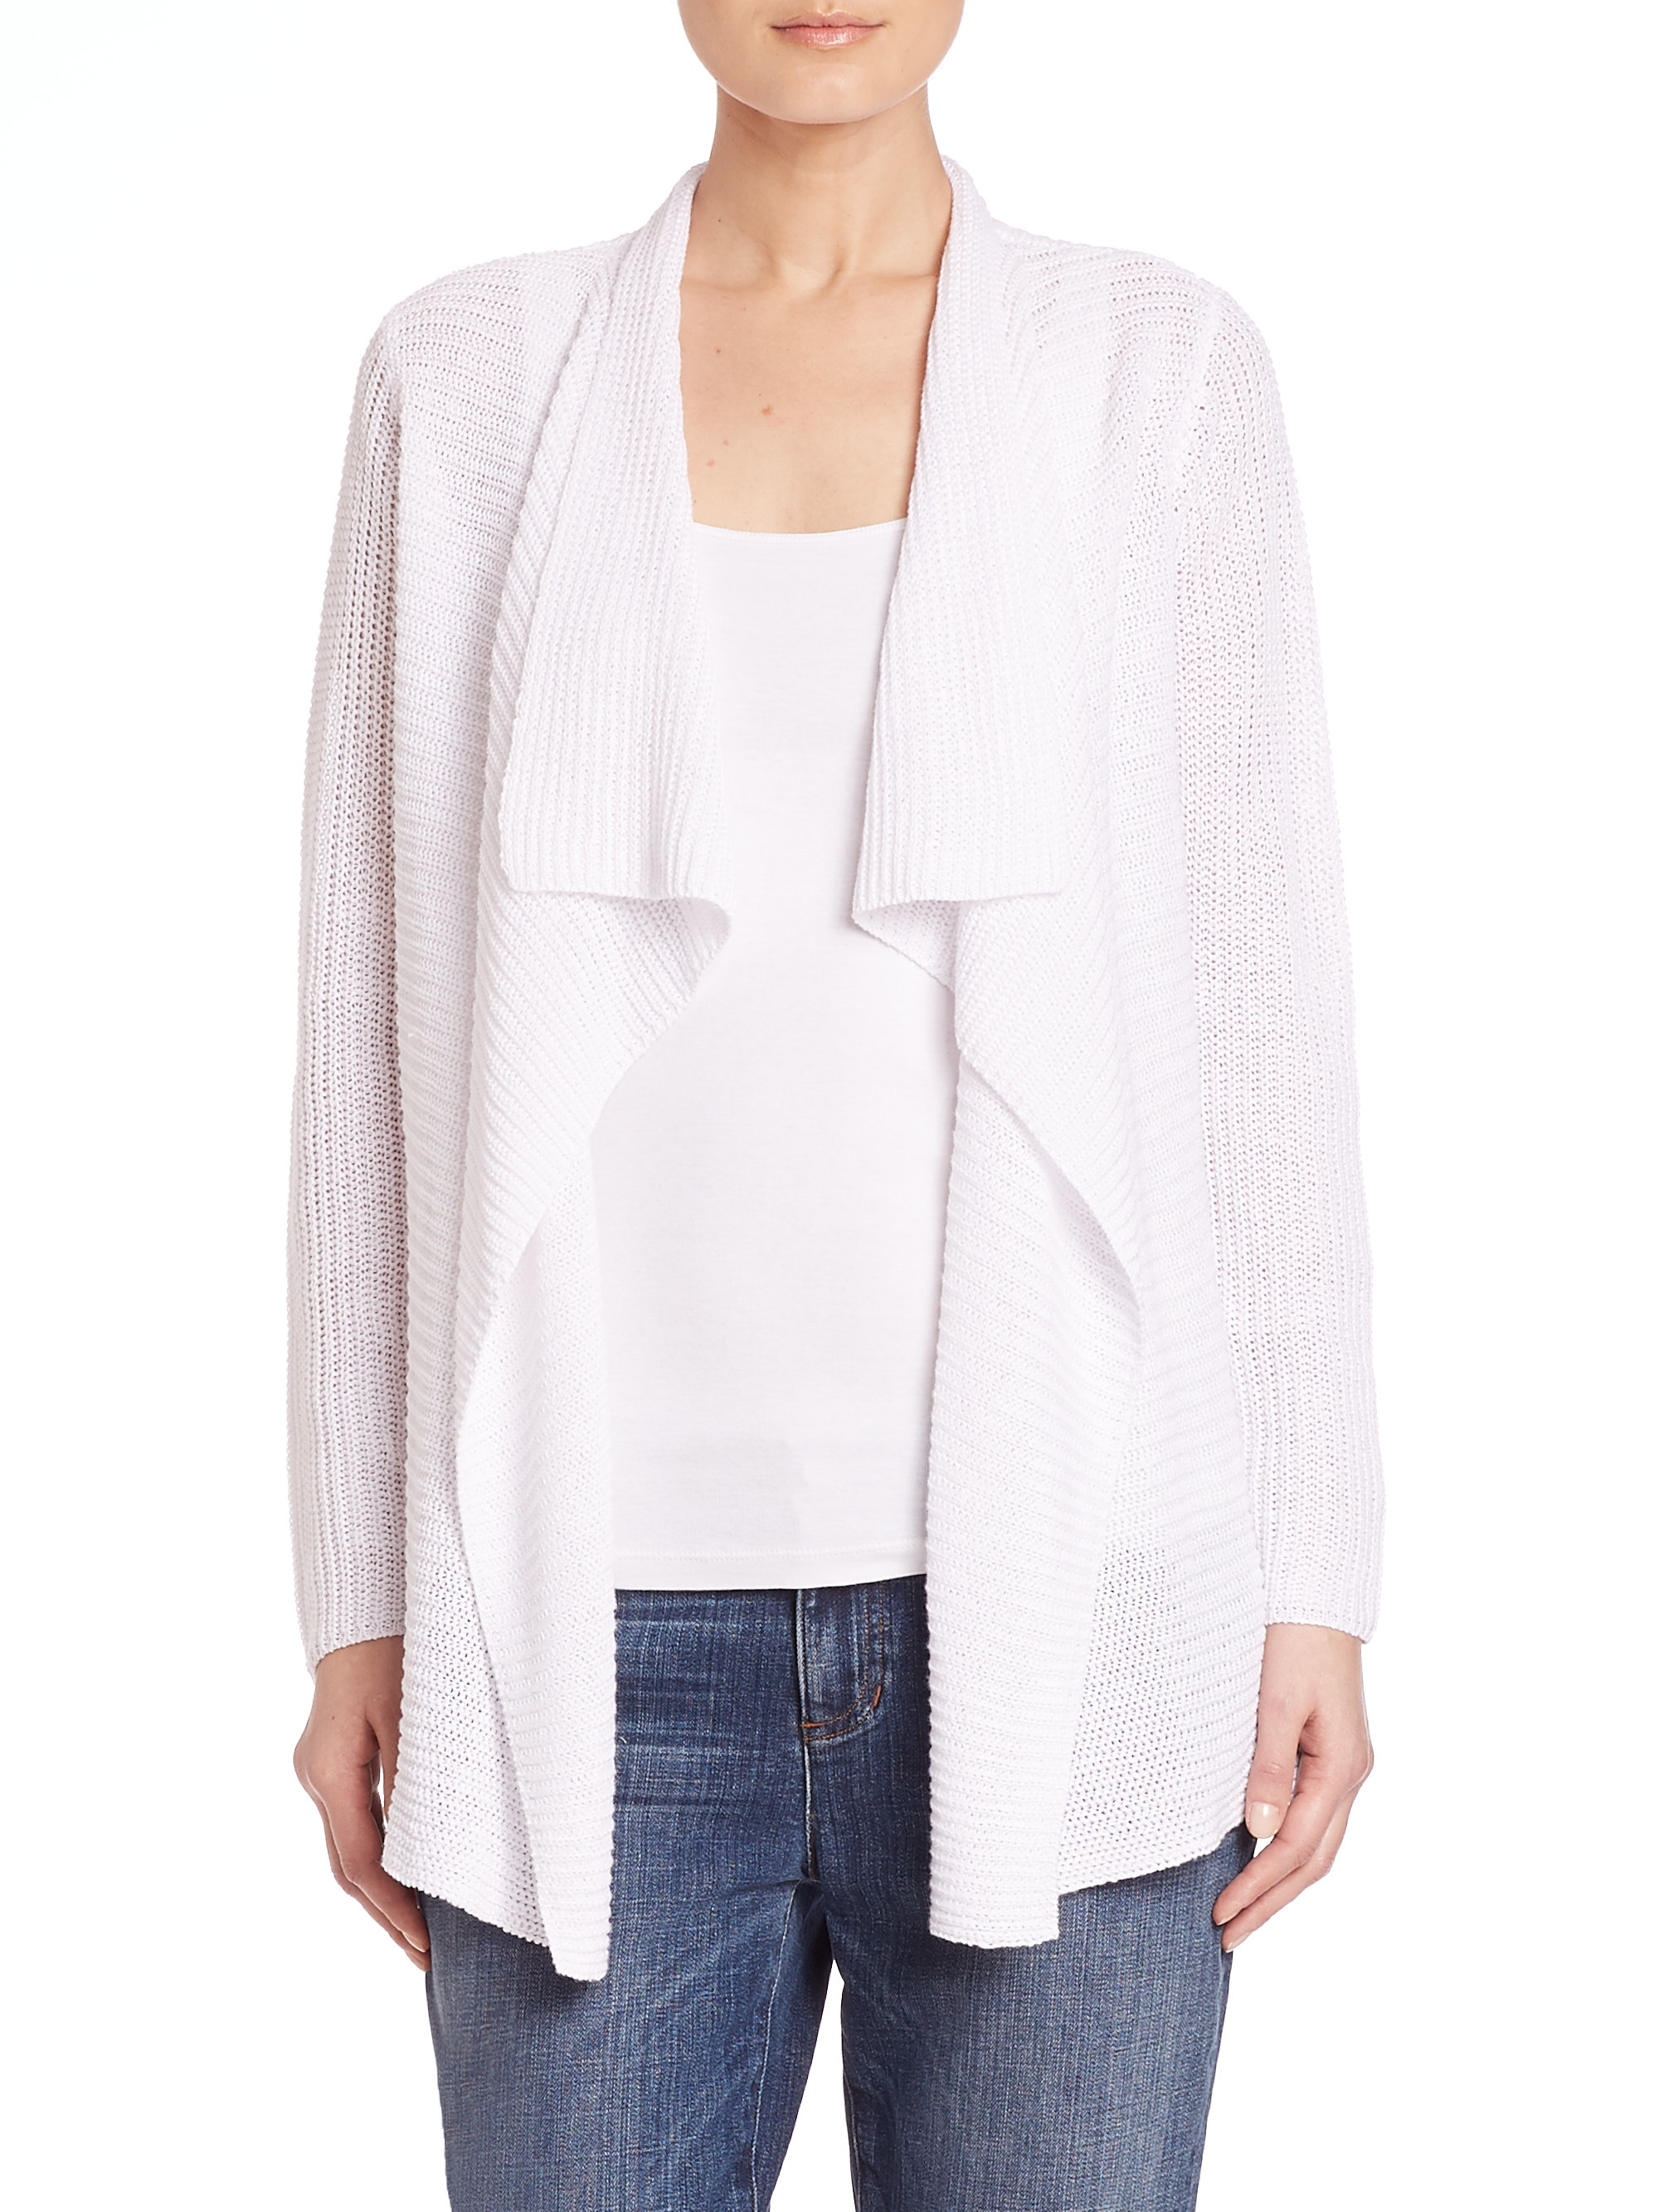 Lyst - Eileen Fisher Ribbed Organic Linen Drape-front Cardigan in White